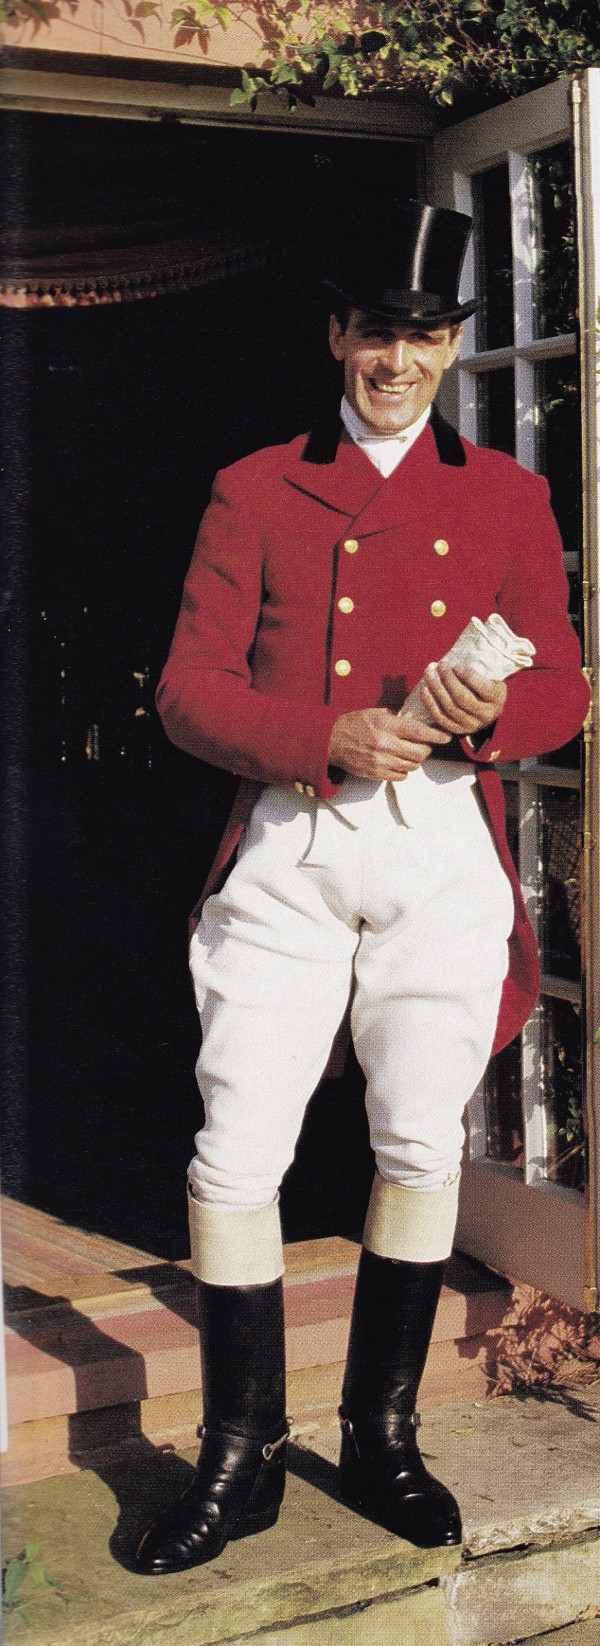 Robin Smith-Ryland, then secretary of the Warwickshire  Hunt, dressed in a swallow-tailed coat of hunting pink with Warwickshire Hunt buttons, buckskin breeches, and a black silk hat outside his 16th-century farmhouse in Sherbourne. HG; March 1989. Photo by Oberto Gili.